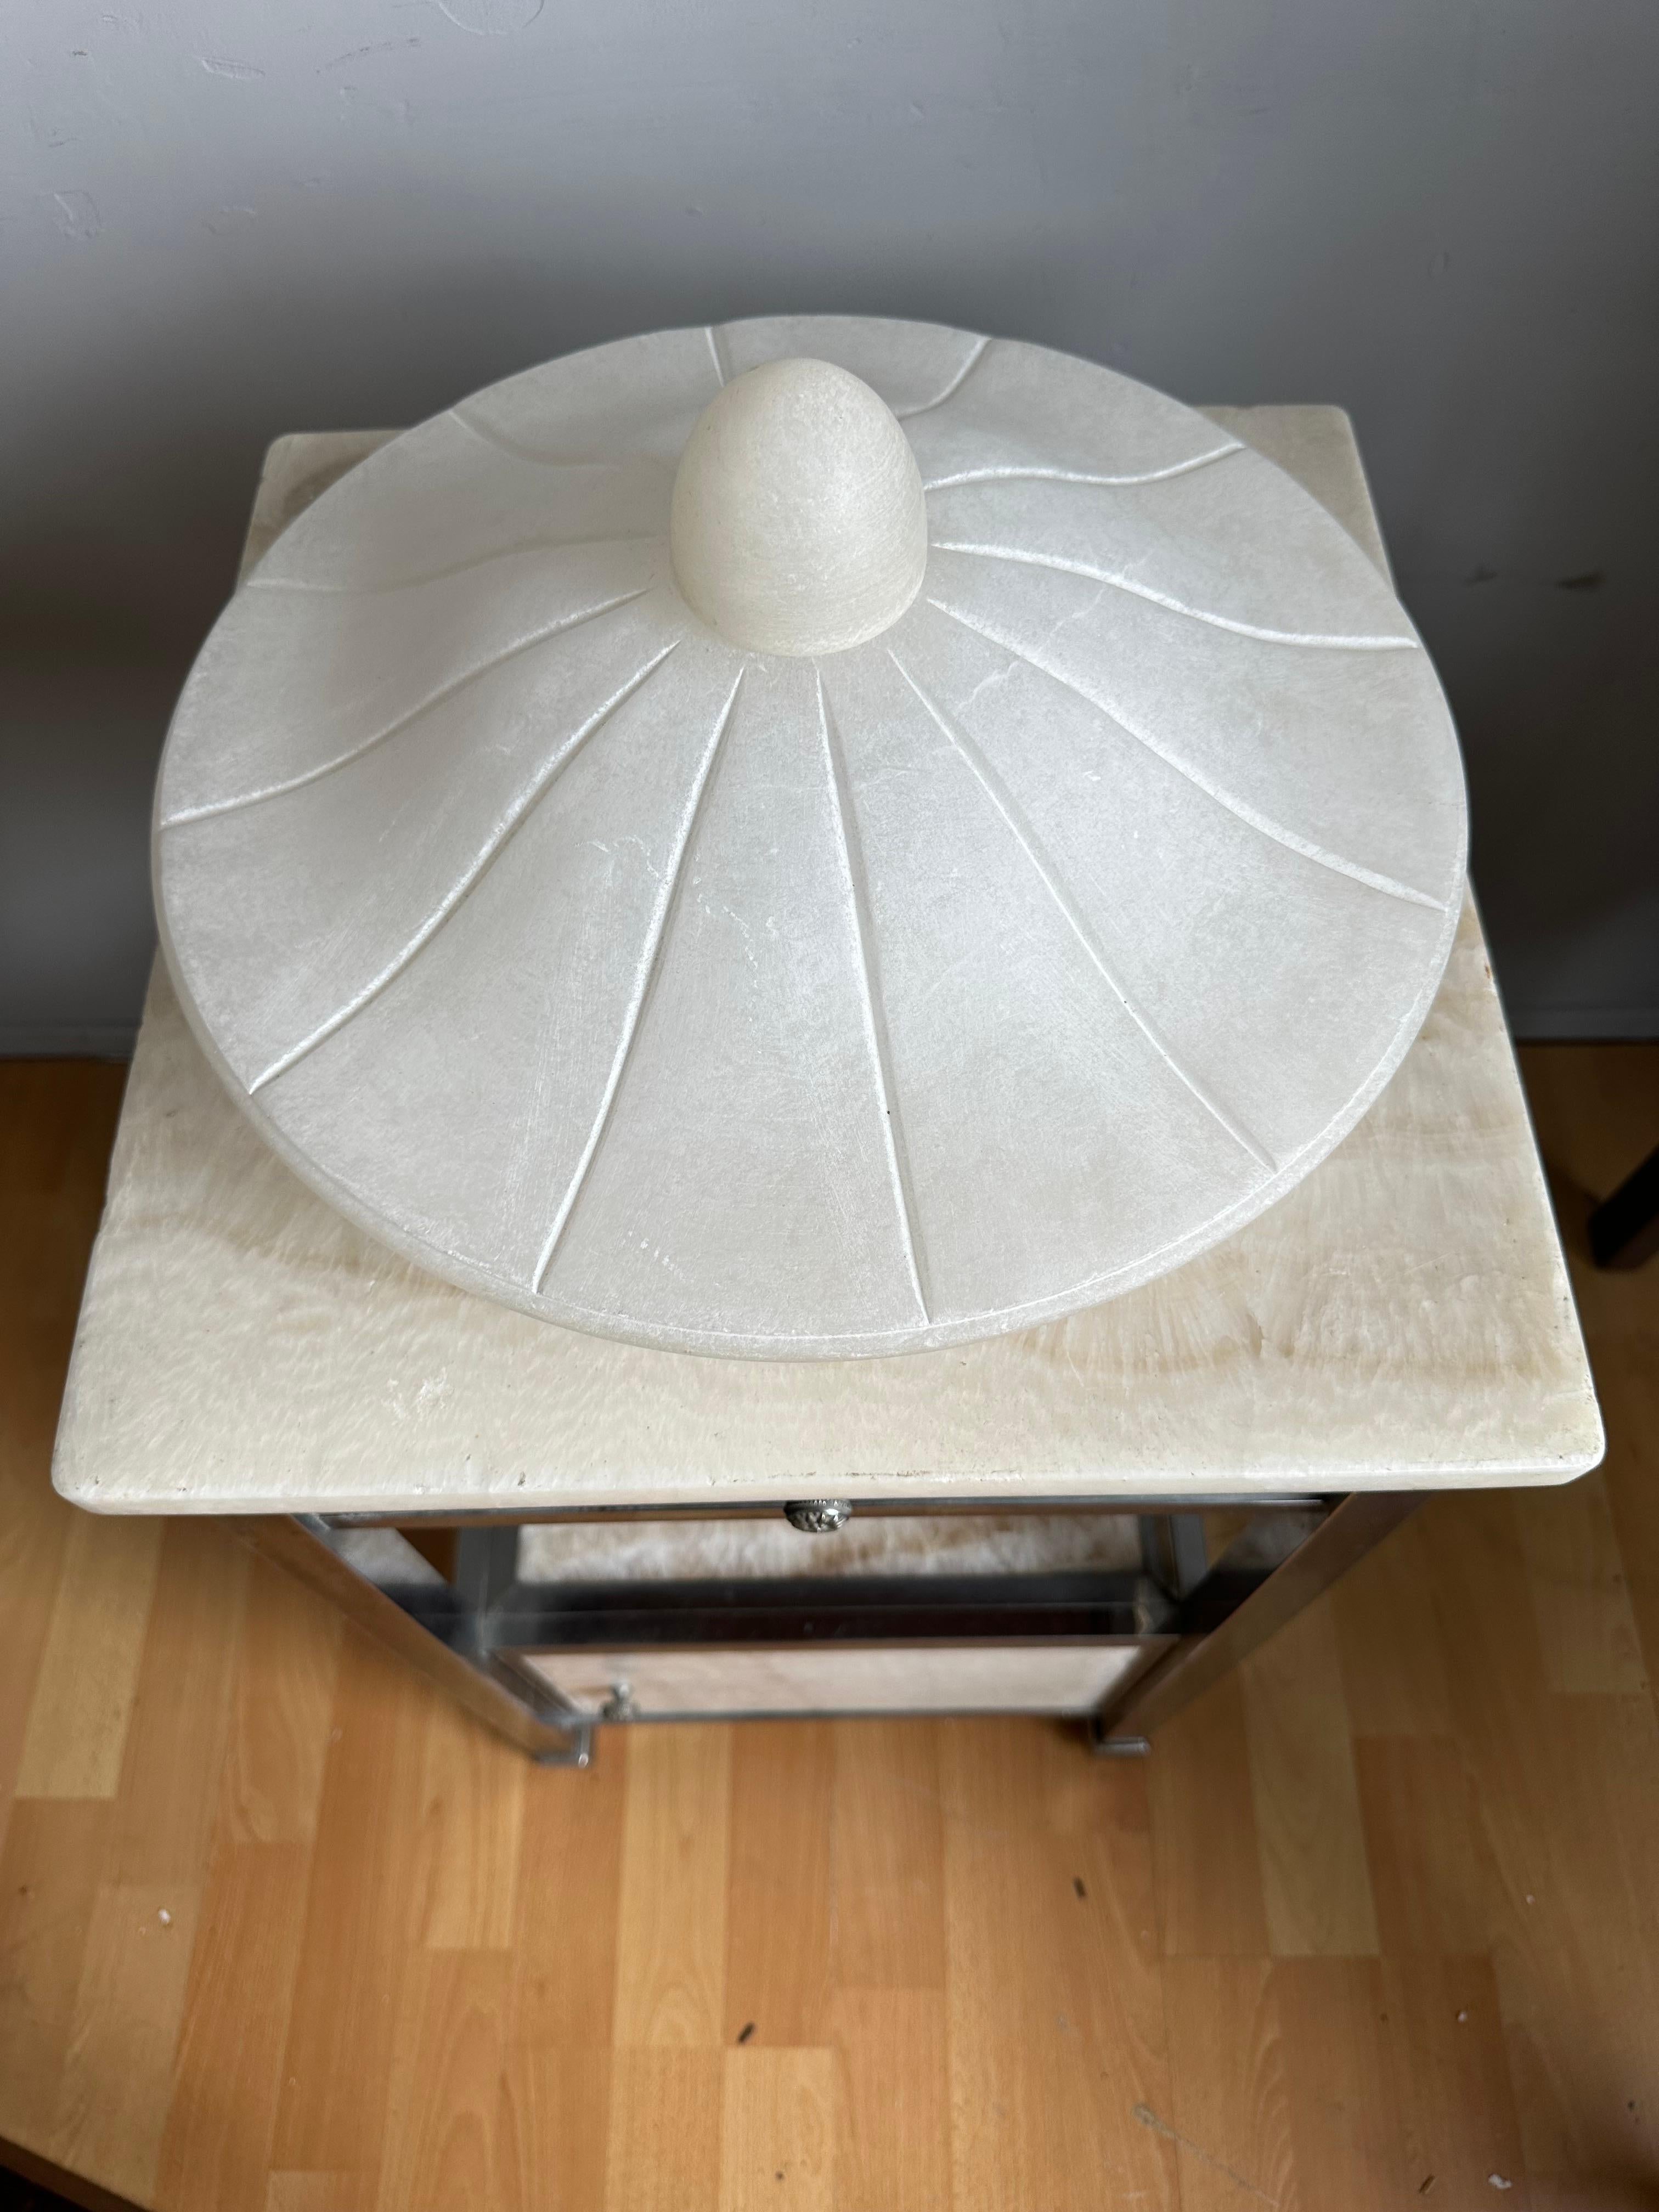 Rare design and good size alabaster flushmount.

This excellent quality and superb condition flush mount could be your perfect lighting solution. We have only seen  this striking design once before and for this rare light to be as good as new makes